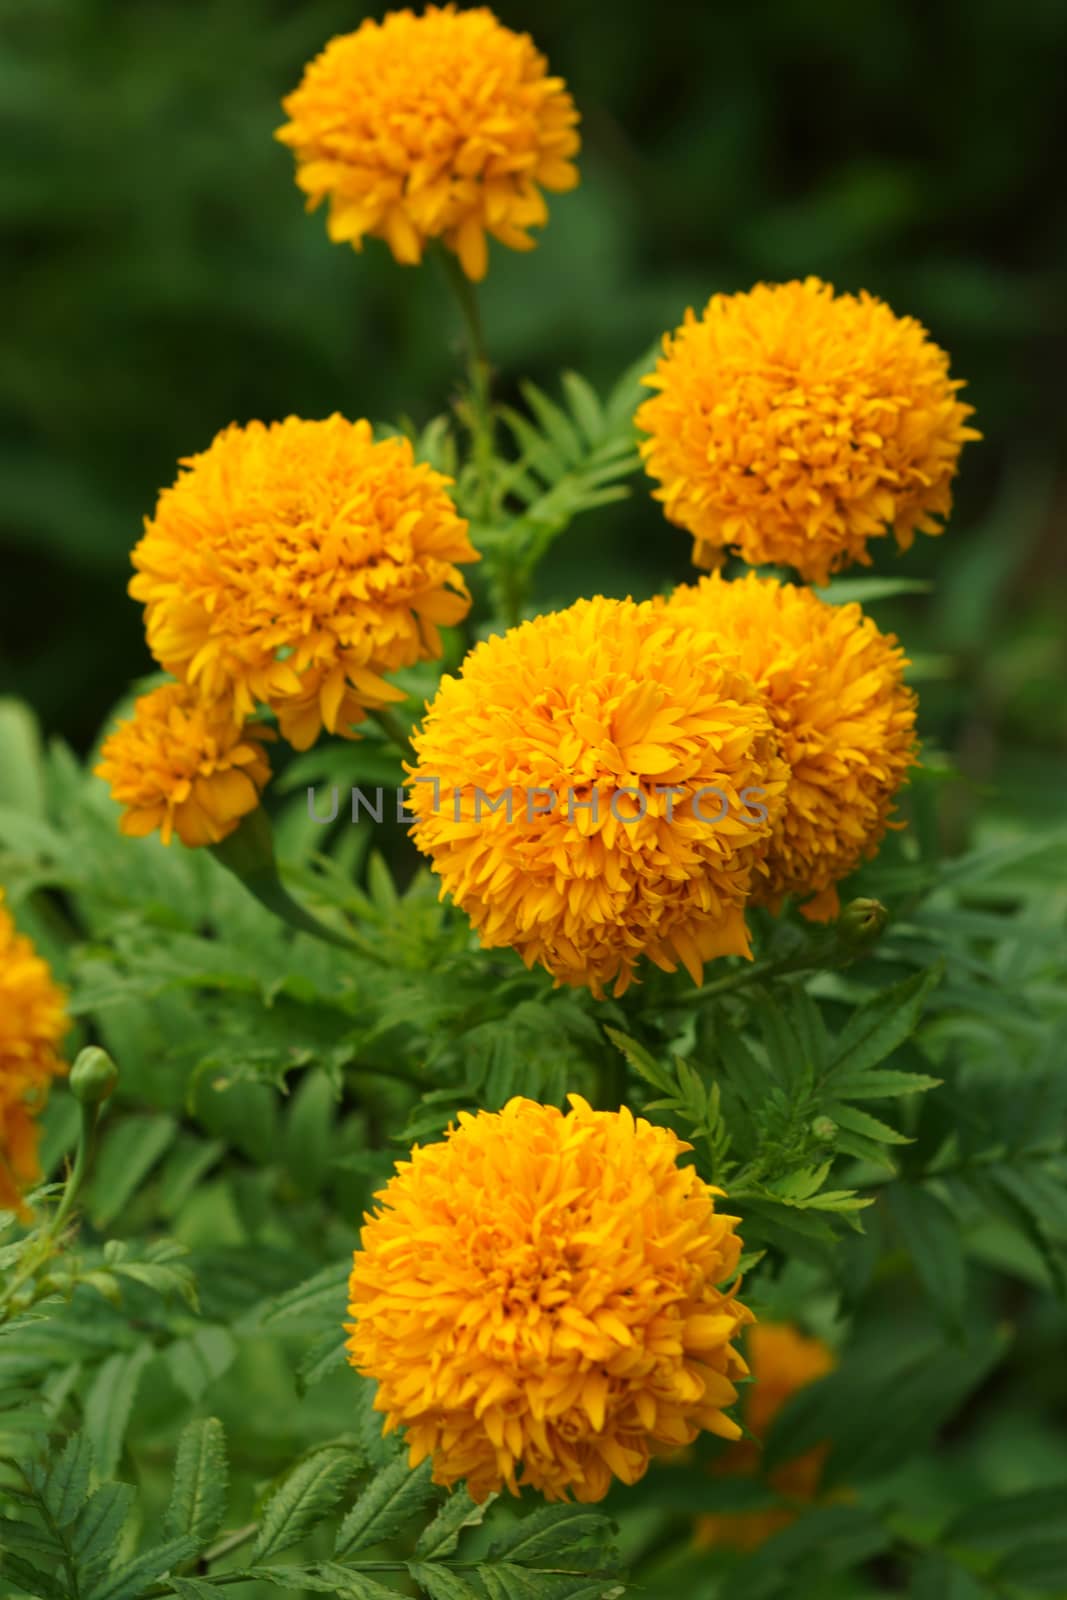 Yellow color of Marigold flower by Noppharat_th